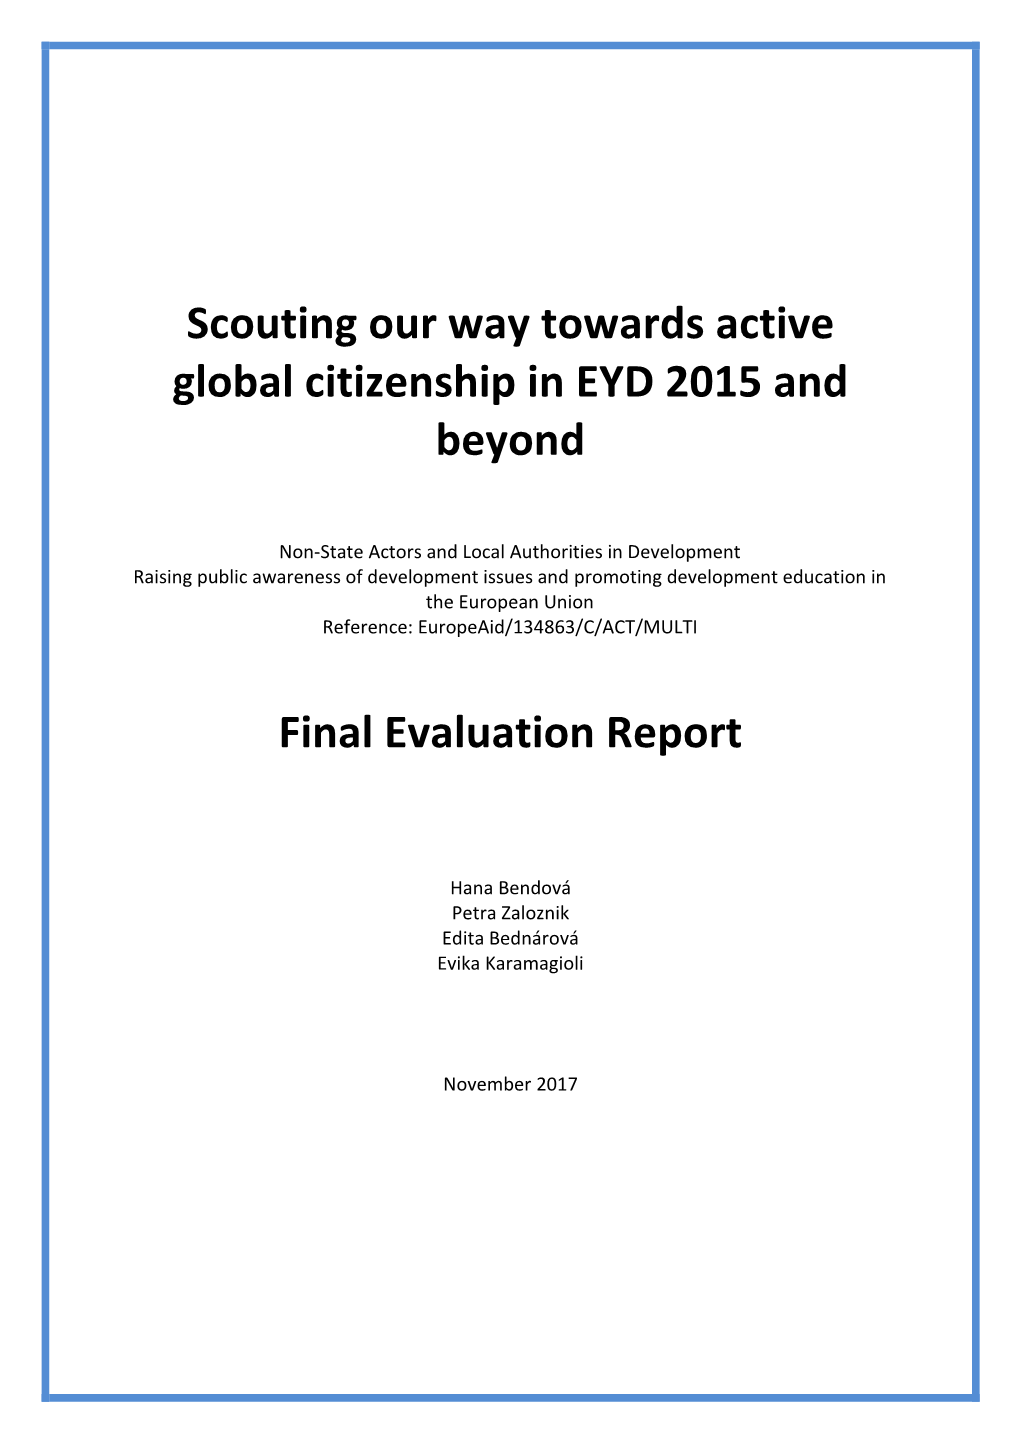 Proposal for the End Evaluation Of